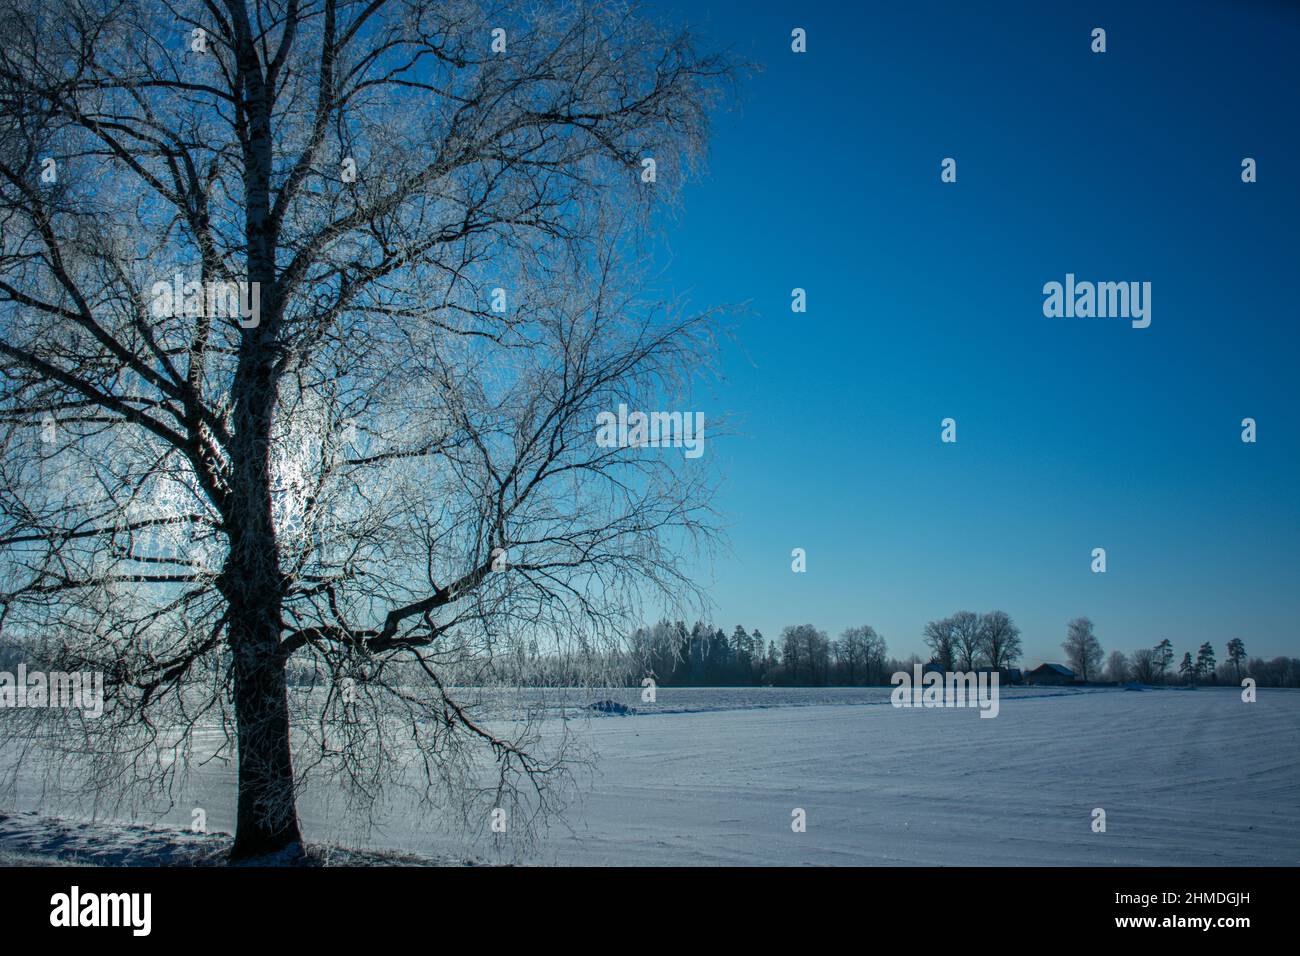 Winter landscape with snowy fields and icy birches in the foreground. Background image Stock Photo